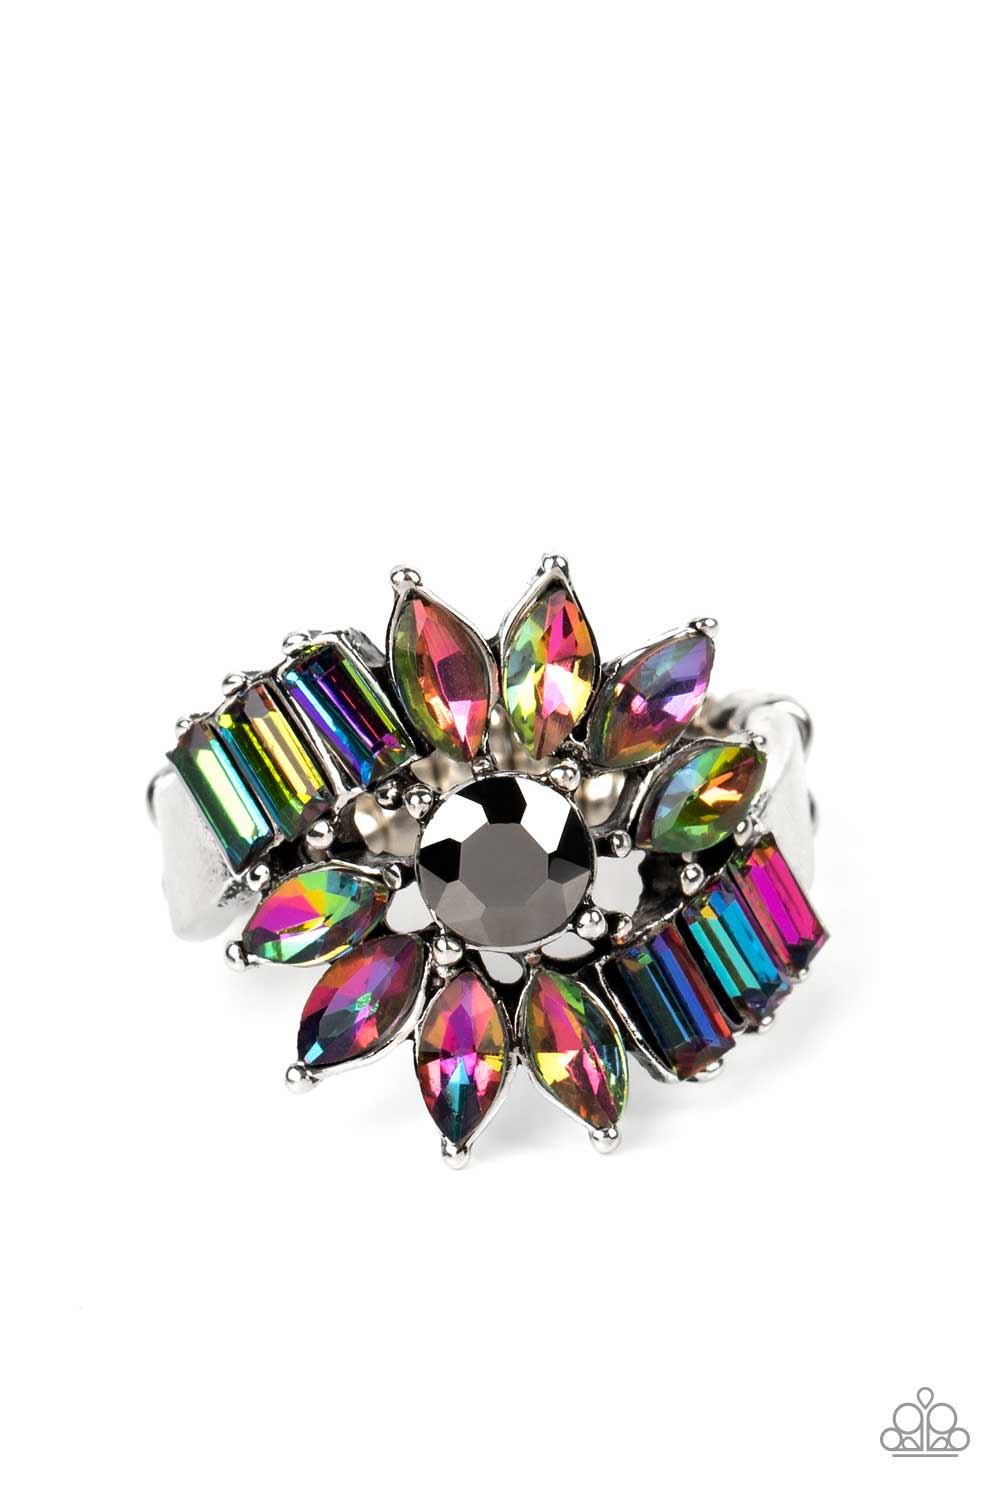 Untamable Universe Multi Oil Spill Ring - Paparazzi Accessories- lightbox - CarasShop.com - $5 Jewelry by Cara Jewels